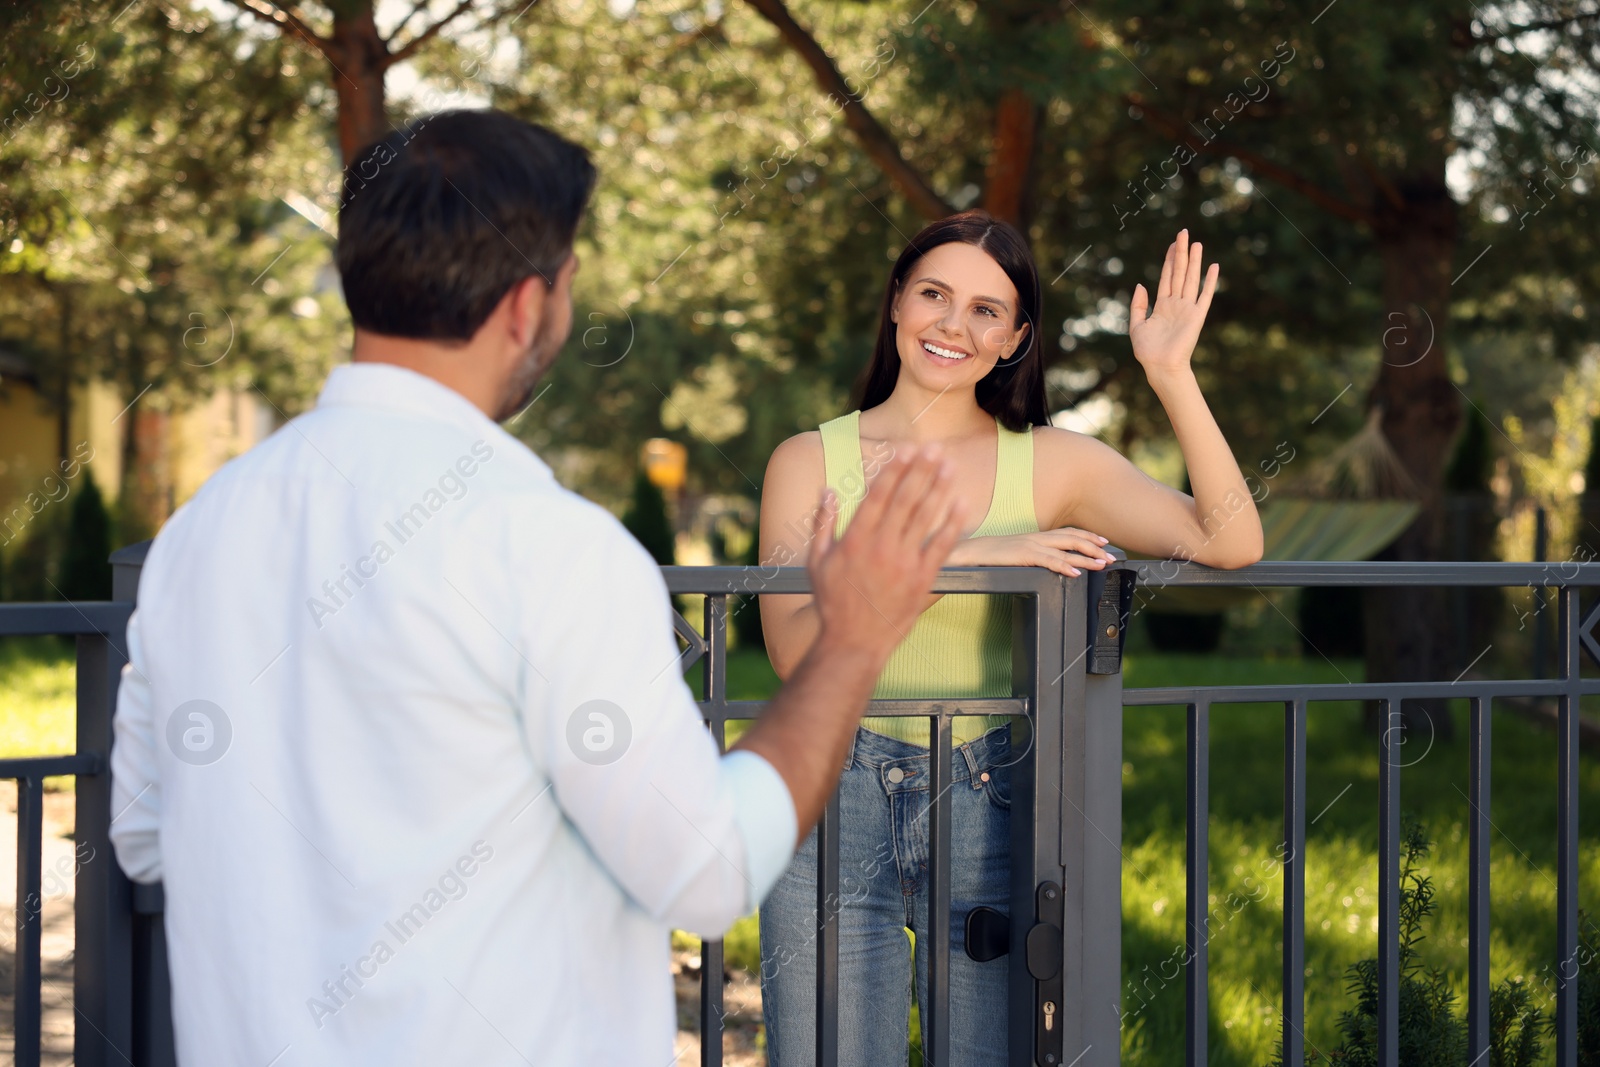 Photo of Friendly relationship with neighbours. Happy woman greeting man near fence outdoors